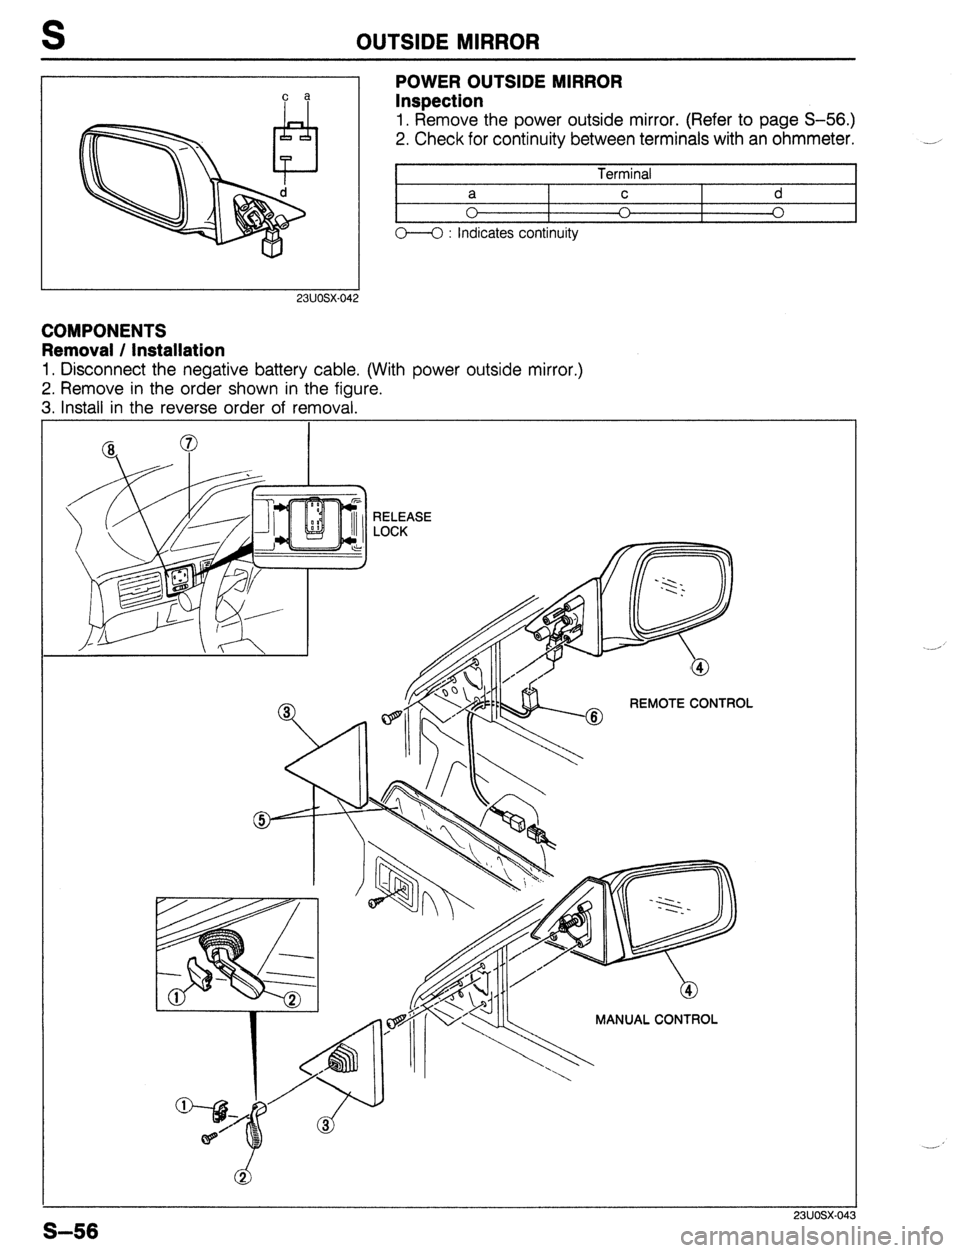 MAZDA PROTEGE 1992  Workshop Manual OUTSIDE MIRROR 
c a 
23UOSX.042 
POWER OUTSIDE MIRROR 
Inspection 
1. Remove the power outside mirror. (Refer to page S-56.) 
2. Check for continuity between terminals with an ohmmeter. 
I 
Terminal I